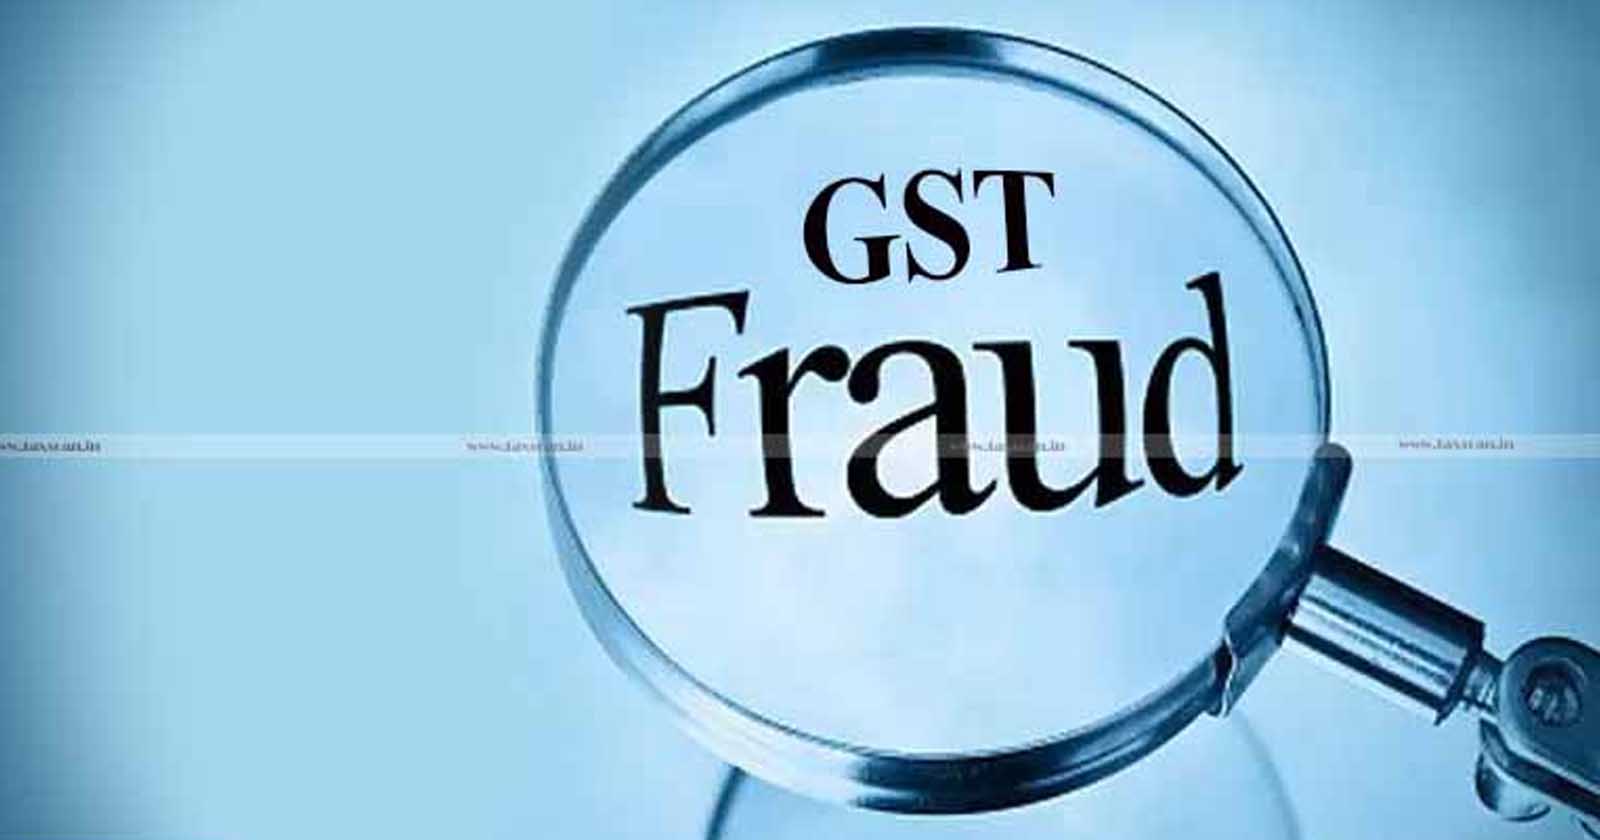 Trial Court - GST Fraud case - GST Fraud - GST - Evidence Uninfluenced by Observations in Bail Order - Evidence - Bail Order - Bail - Evidence Uninfluenced - Punjab and Haryana High Court - Taxscan